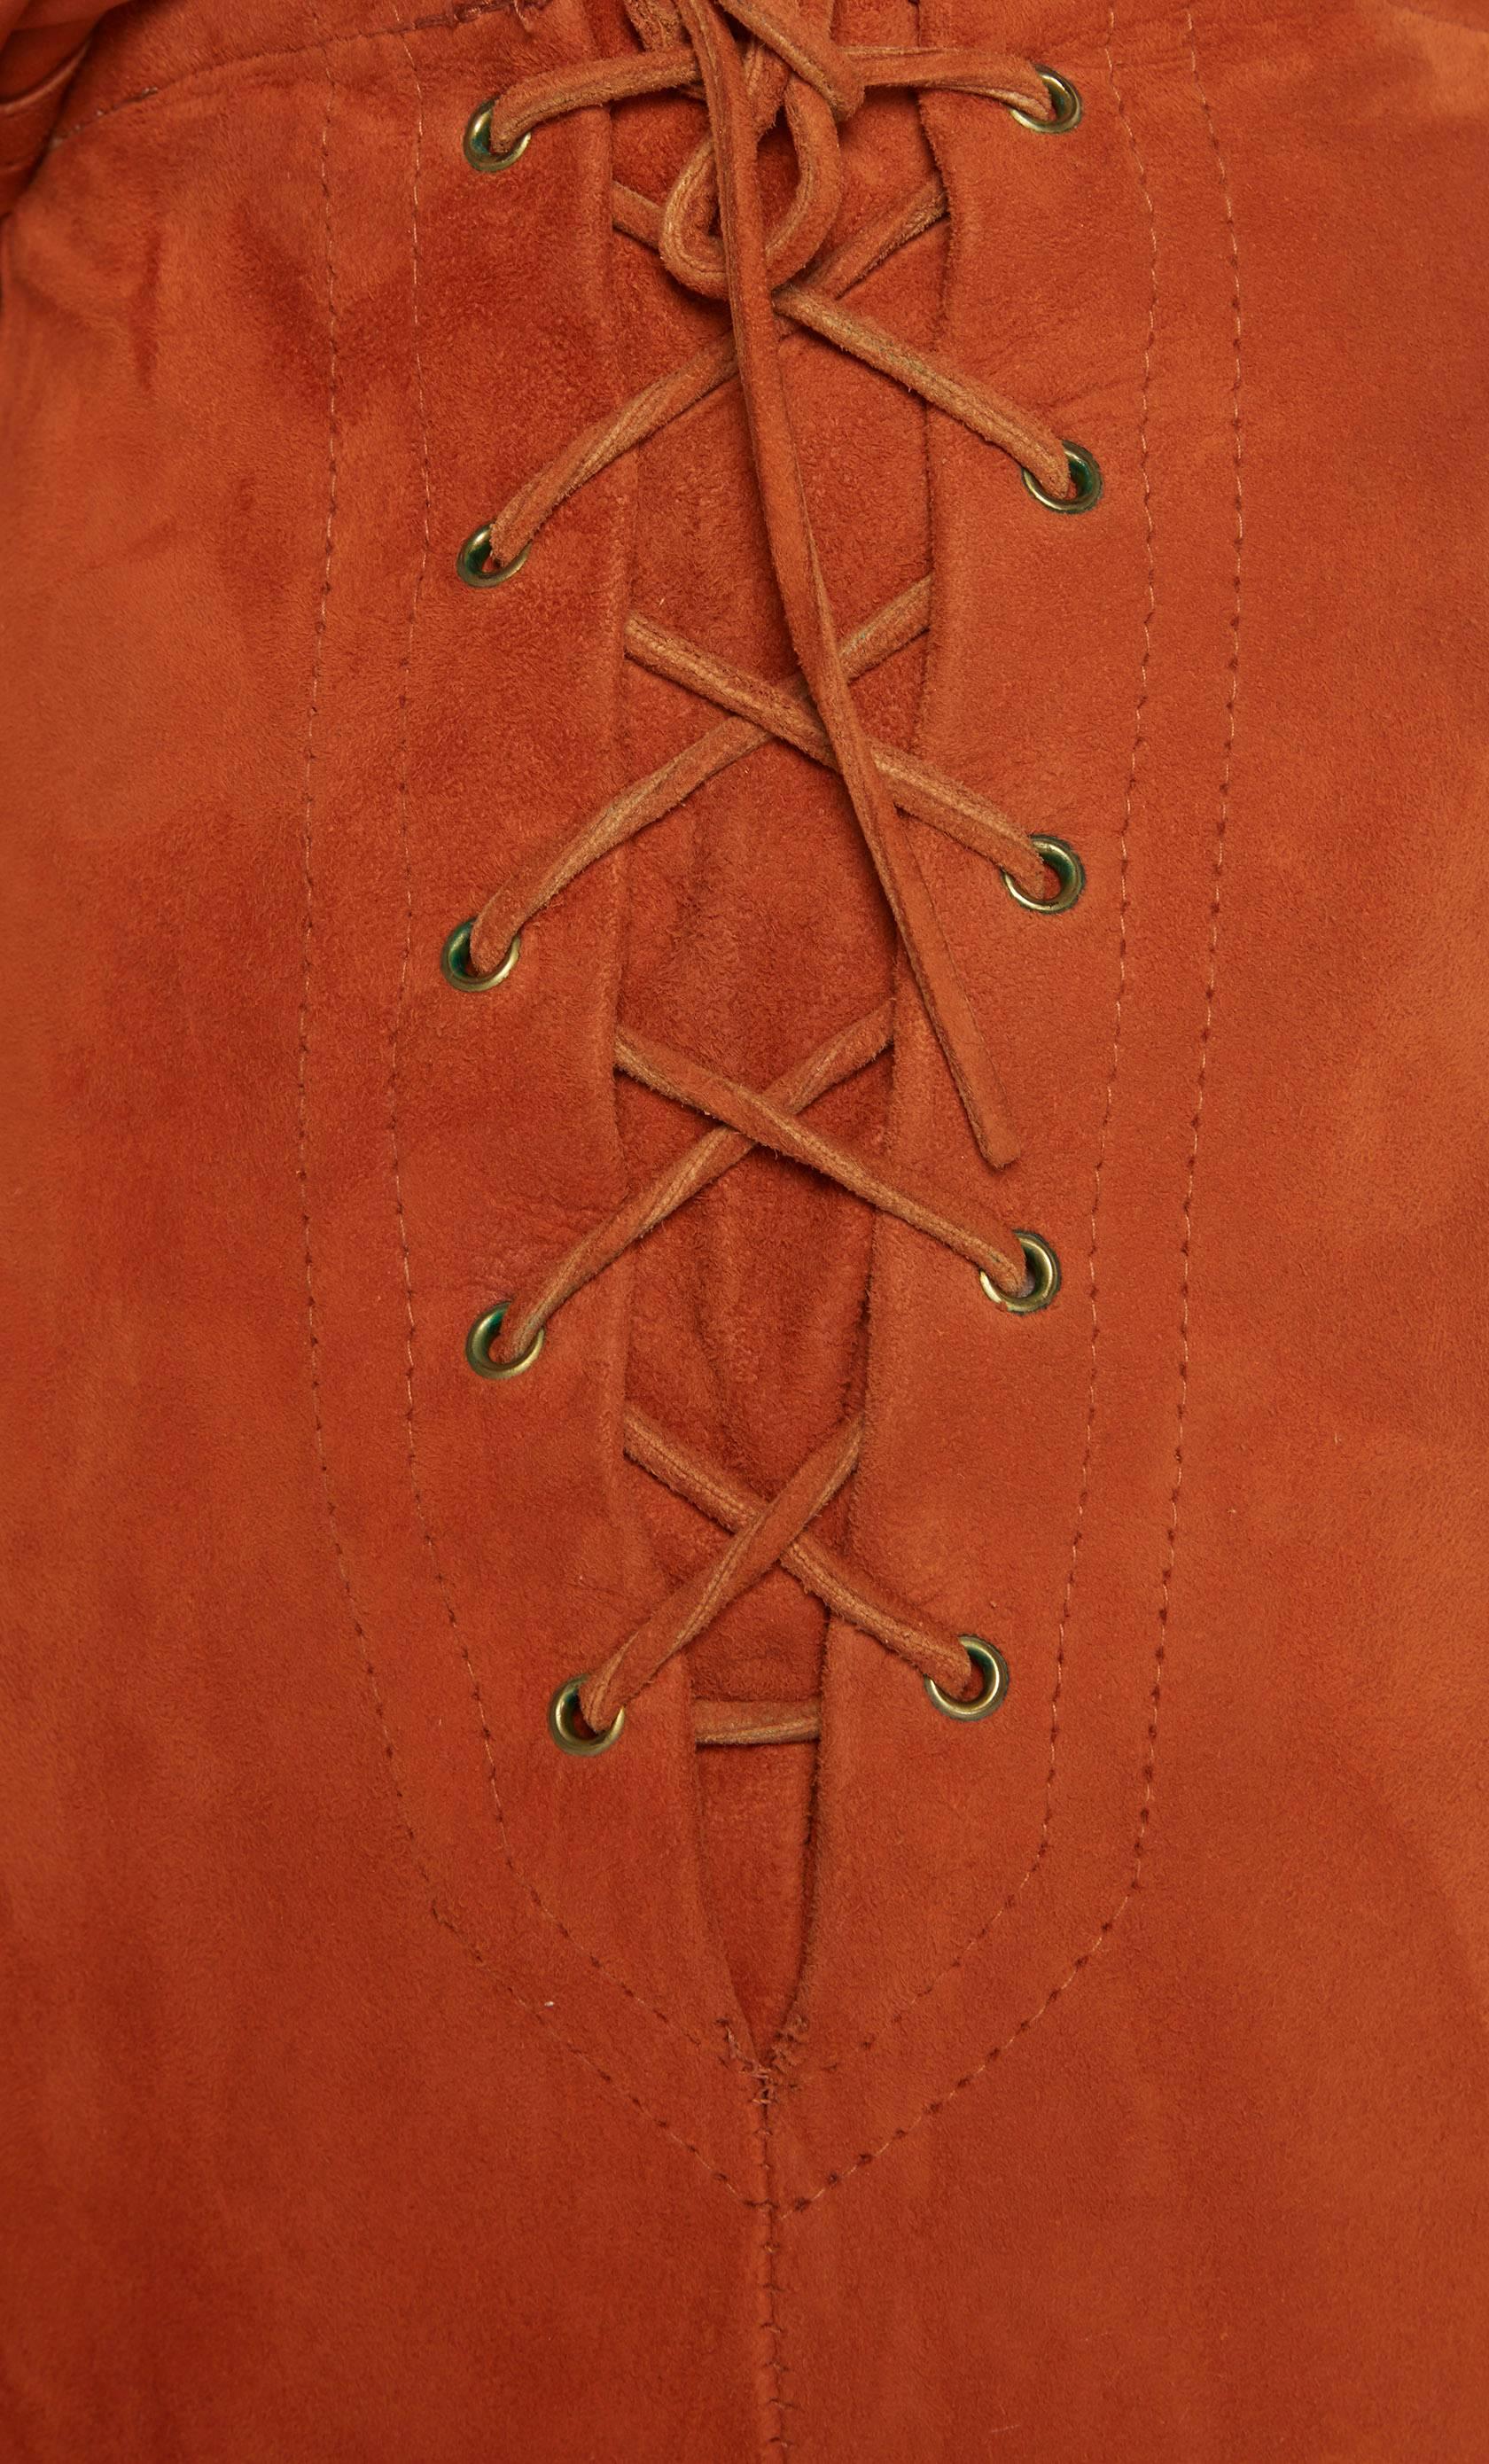 Women's Carol Horn brown suede culottes and jacket, circa 1968